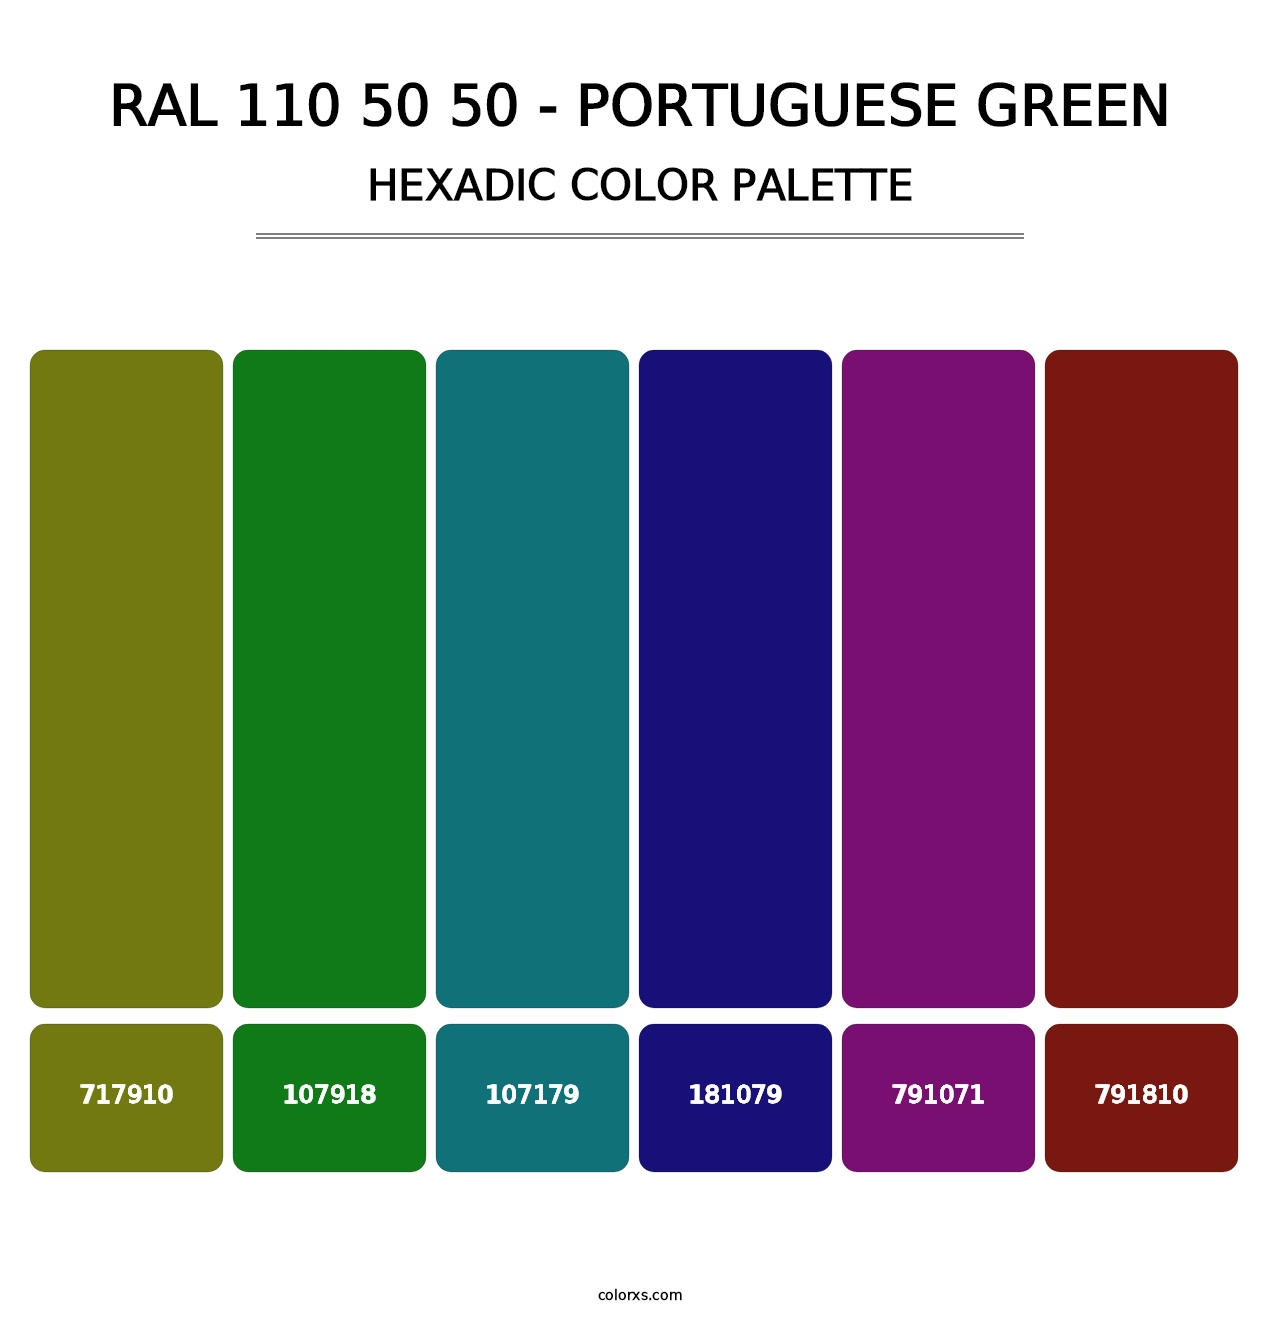 RAL 110 50 50 - Portuguese Green - Hexadic Color Palette